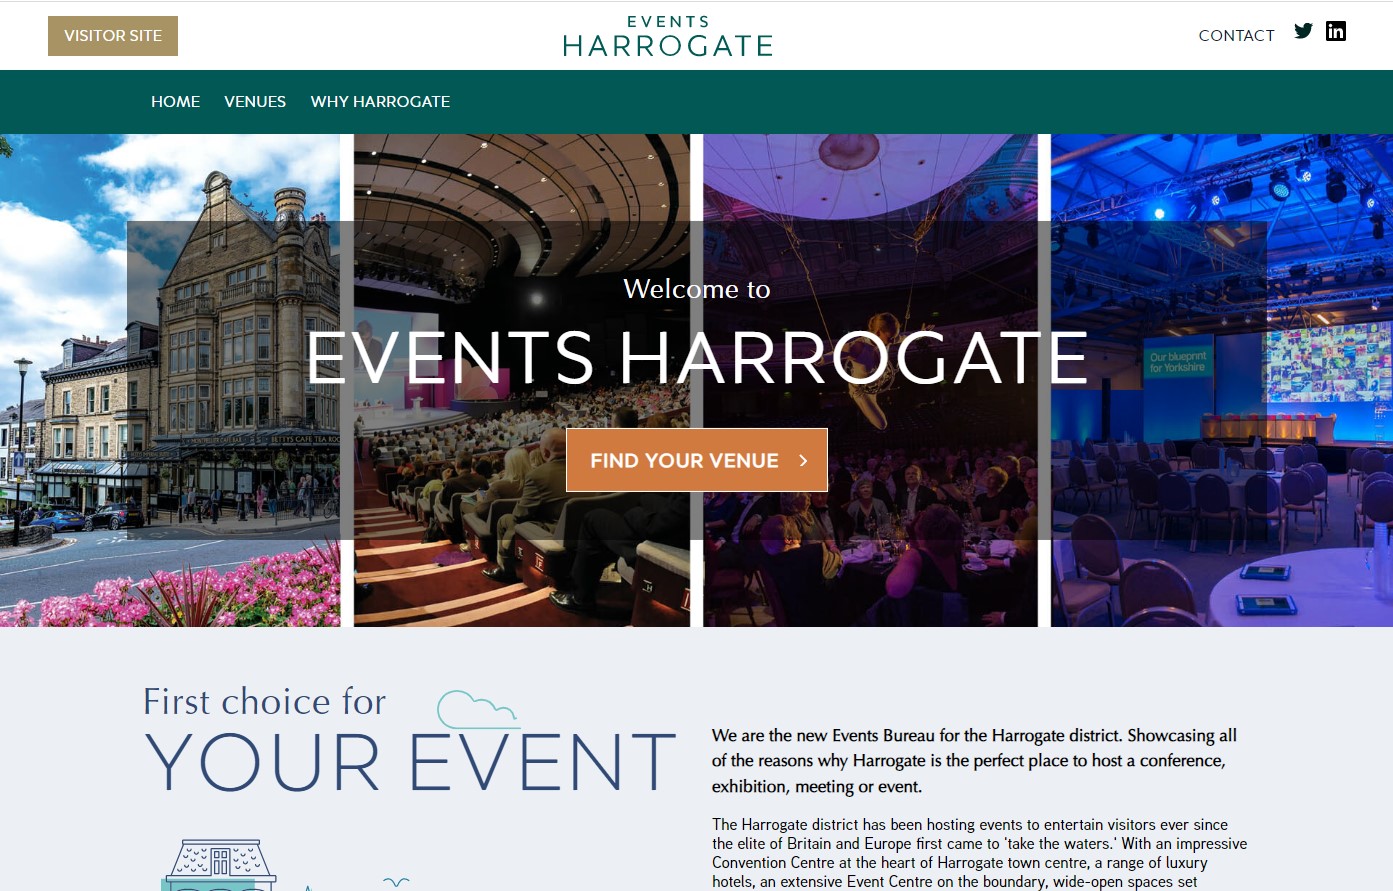 The events Harrogte website